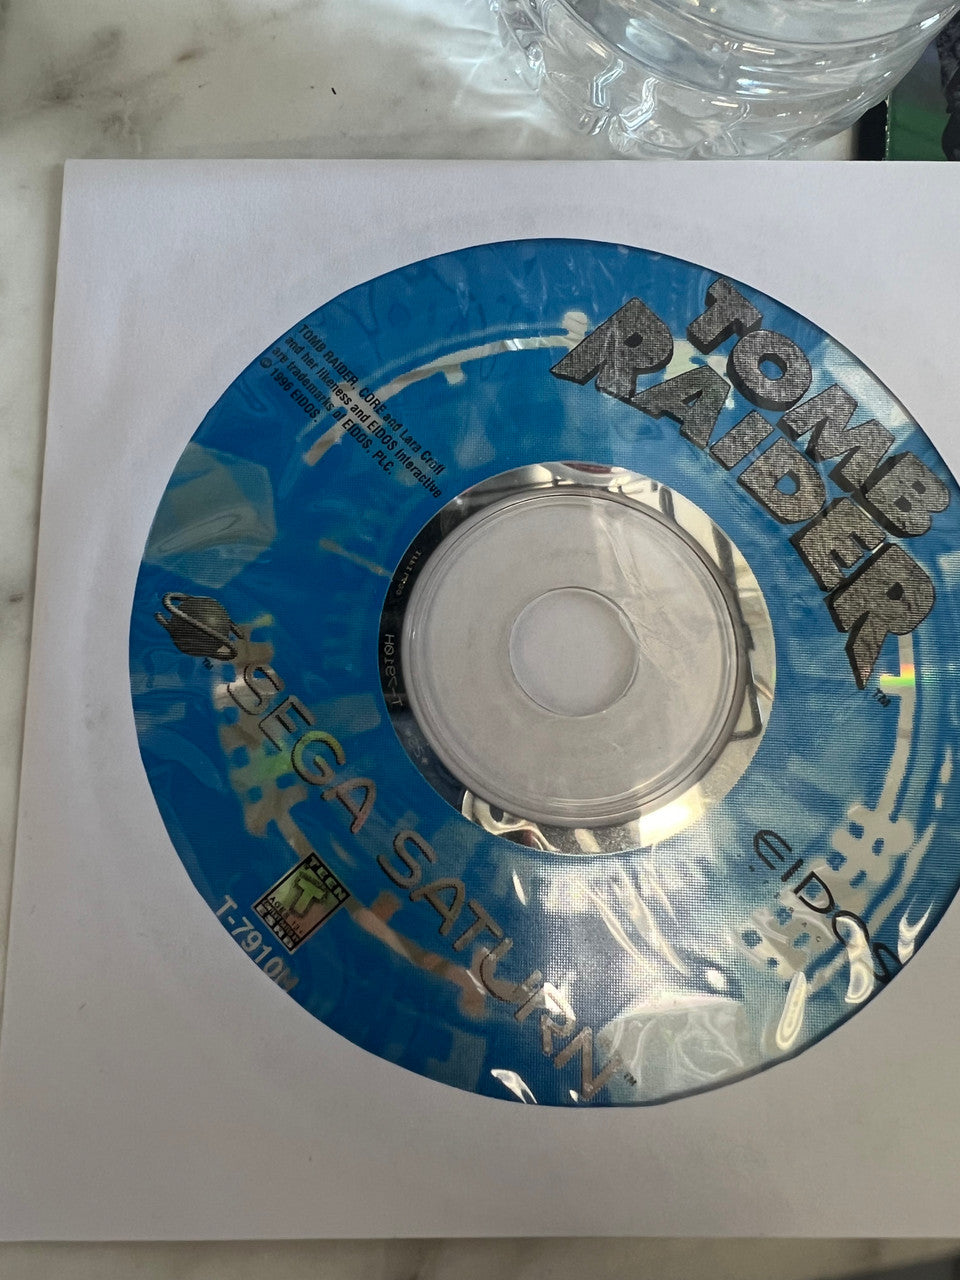 Tomb Raider Sega Saturn Disc Only great condition